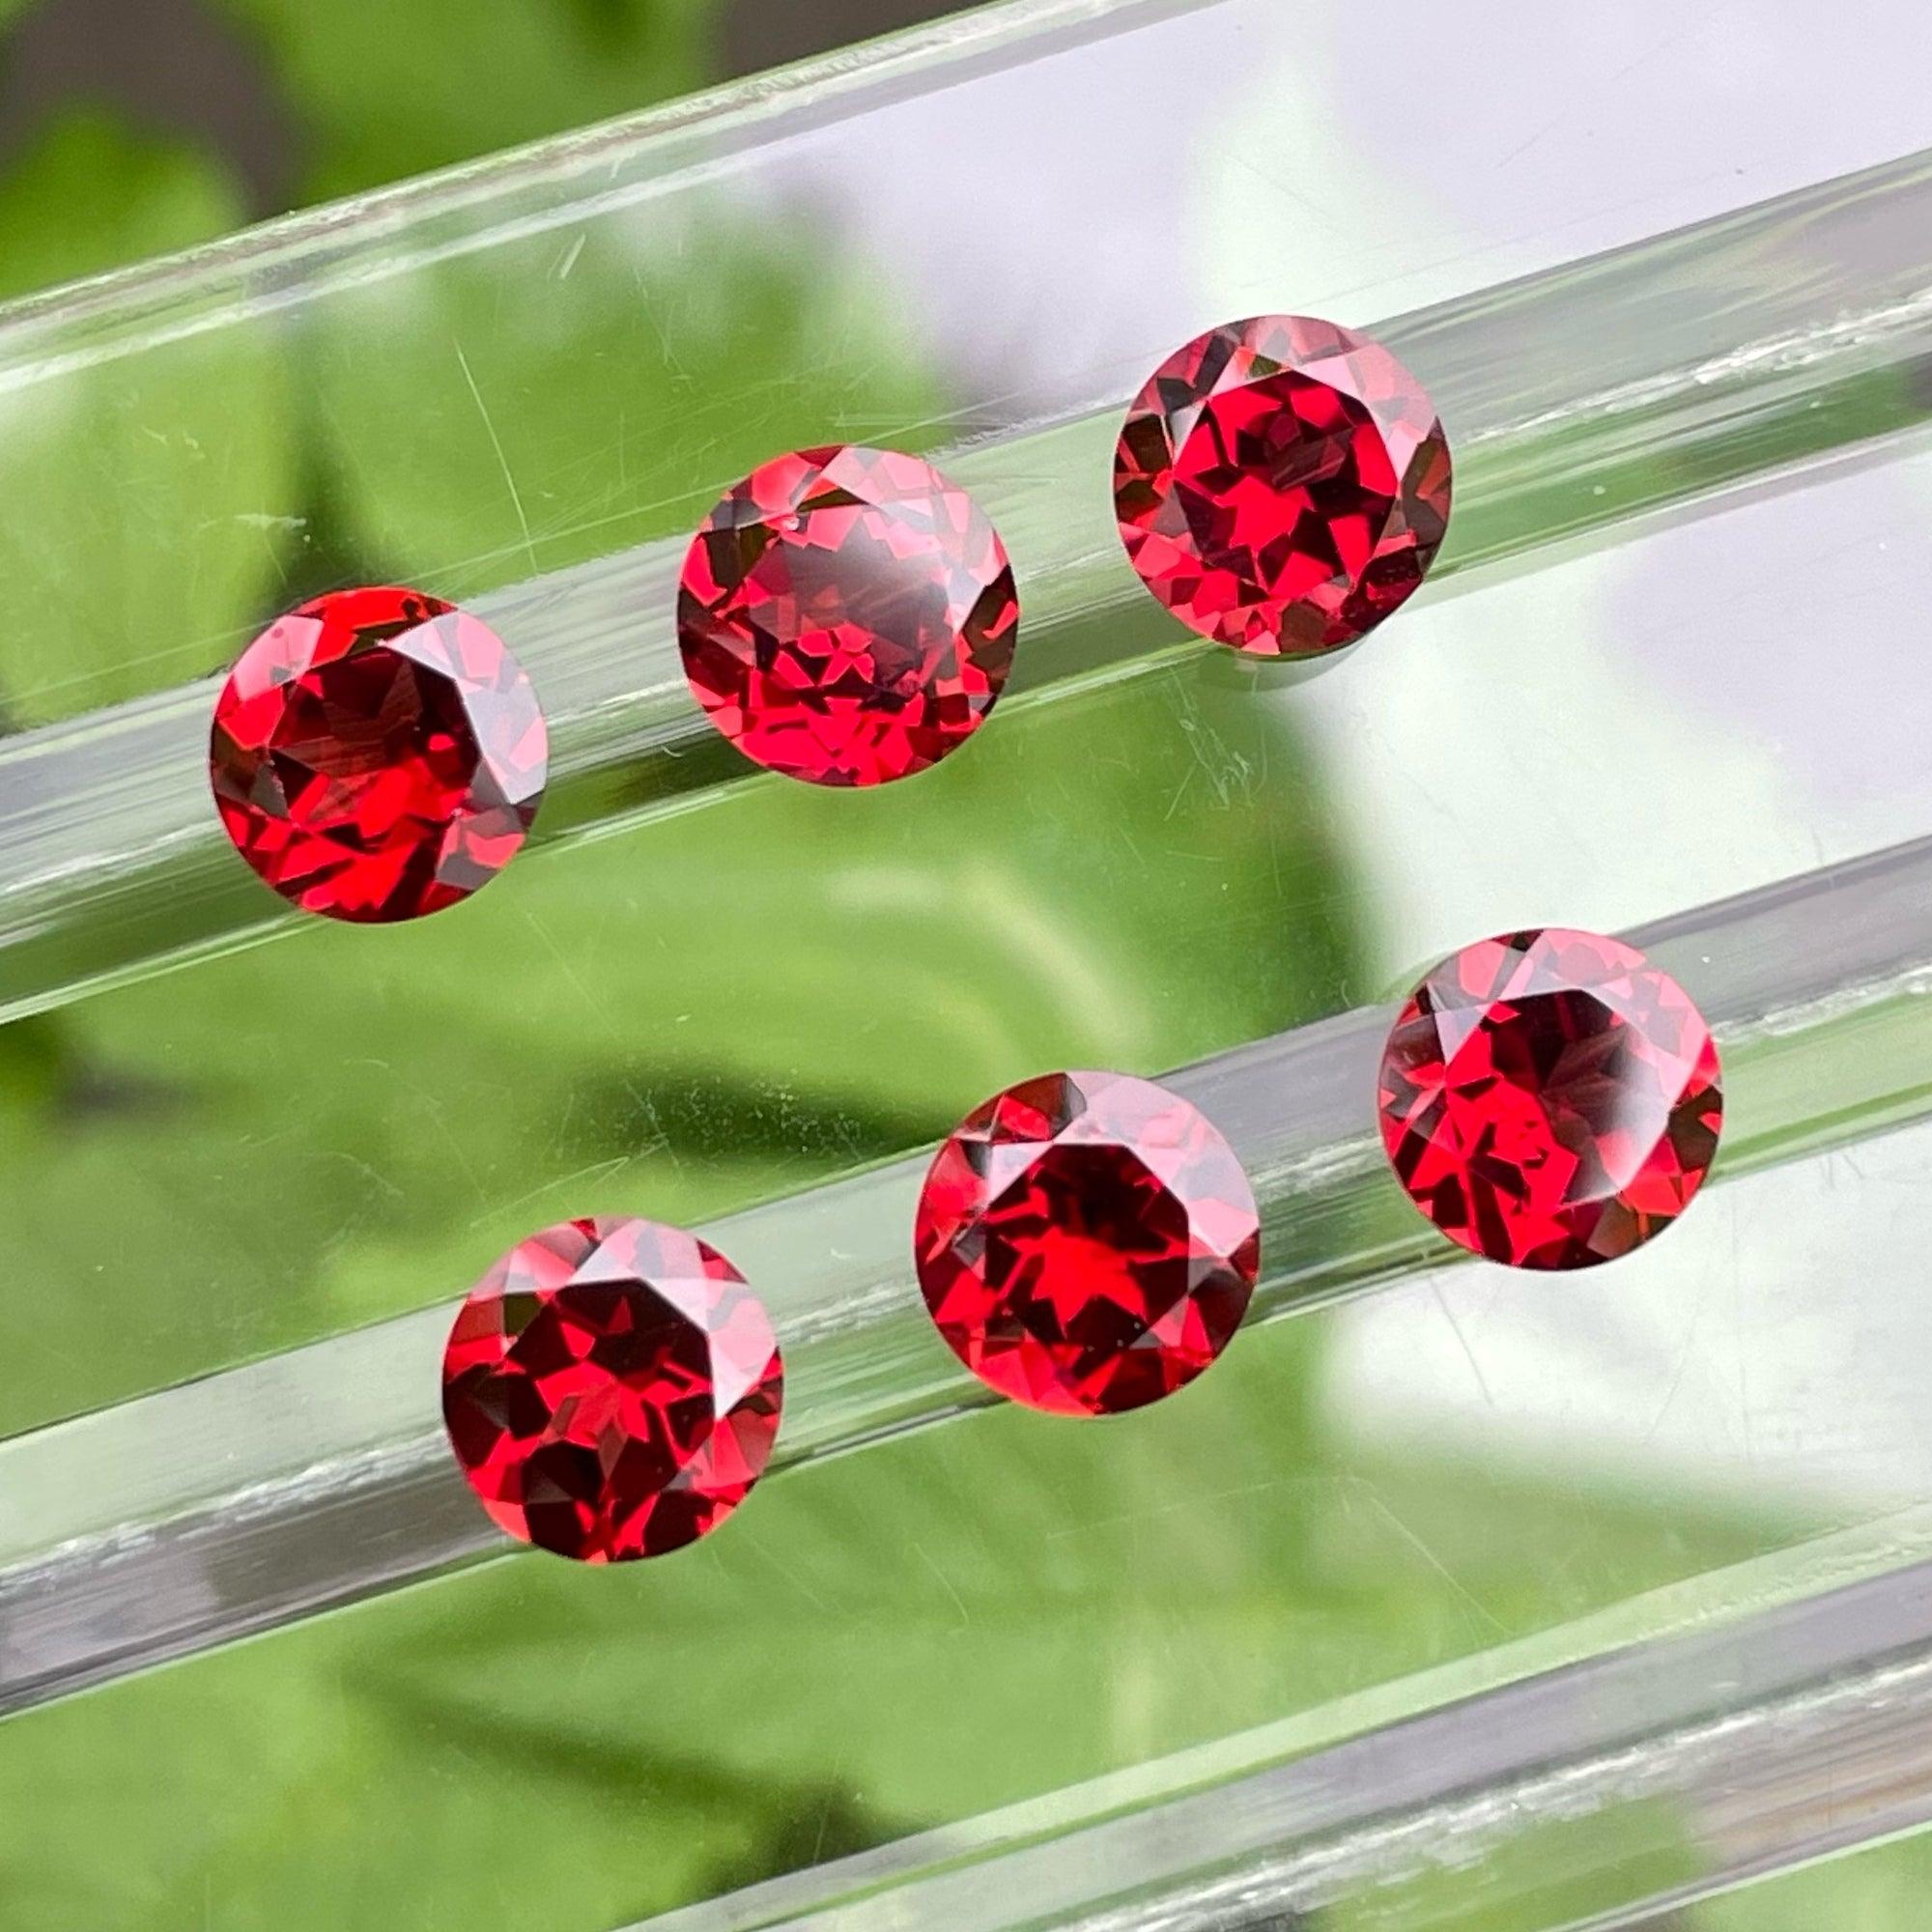 Excellent Cut Red Garnet  Stone, Available For Sale at Wholesale Price Natural High Quality 13.50 Carats Untreated  Garnet Gemstone From Malawi.

 

Product Information:
GEMSTONE NAME: Excellent Cut Red Garnet  Stone
WEIGHT: 13.50 Carats
DIMENSIONS: